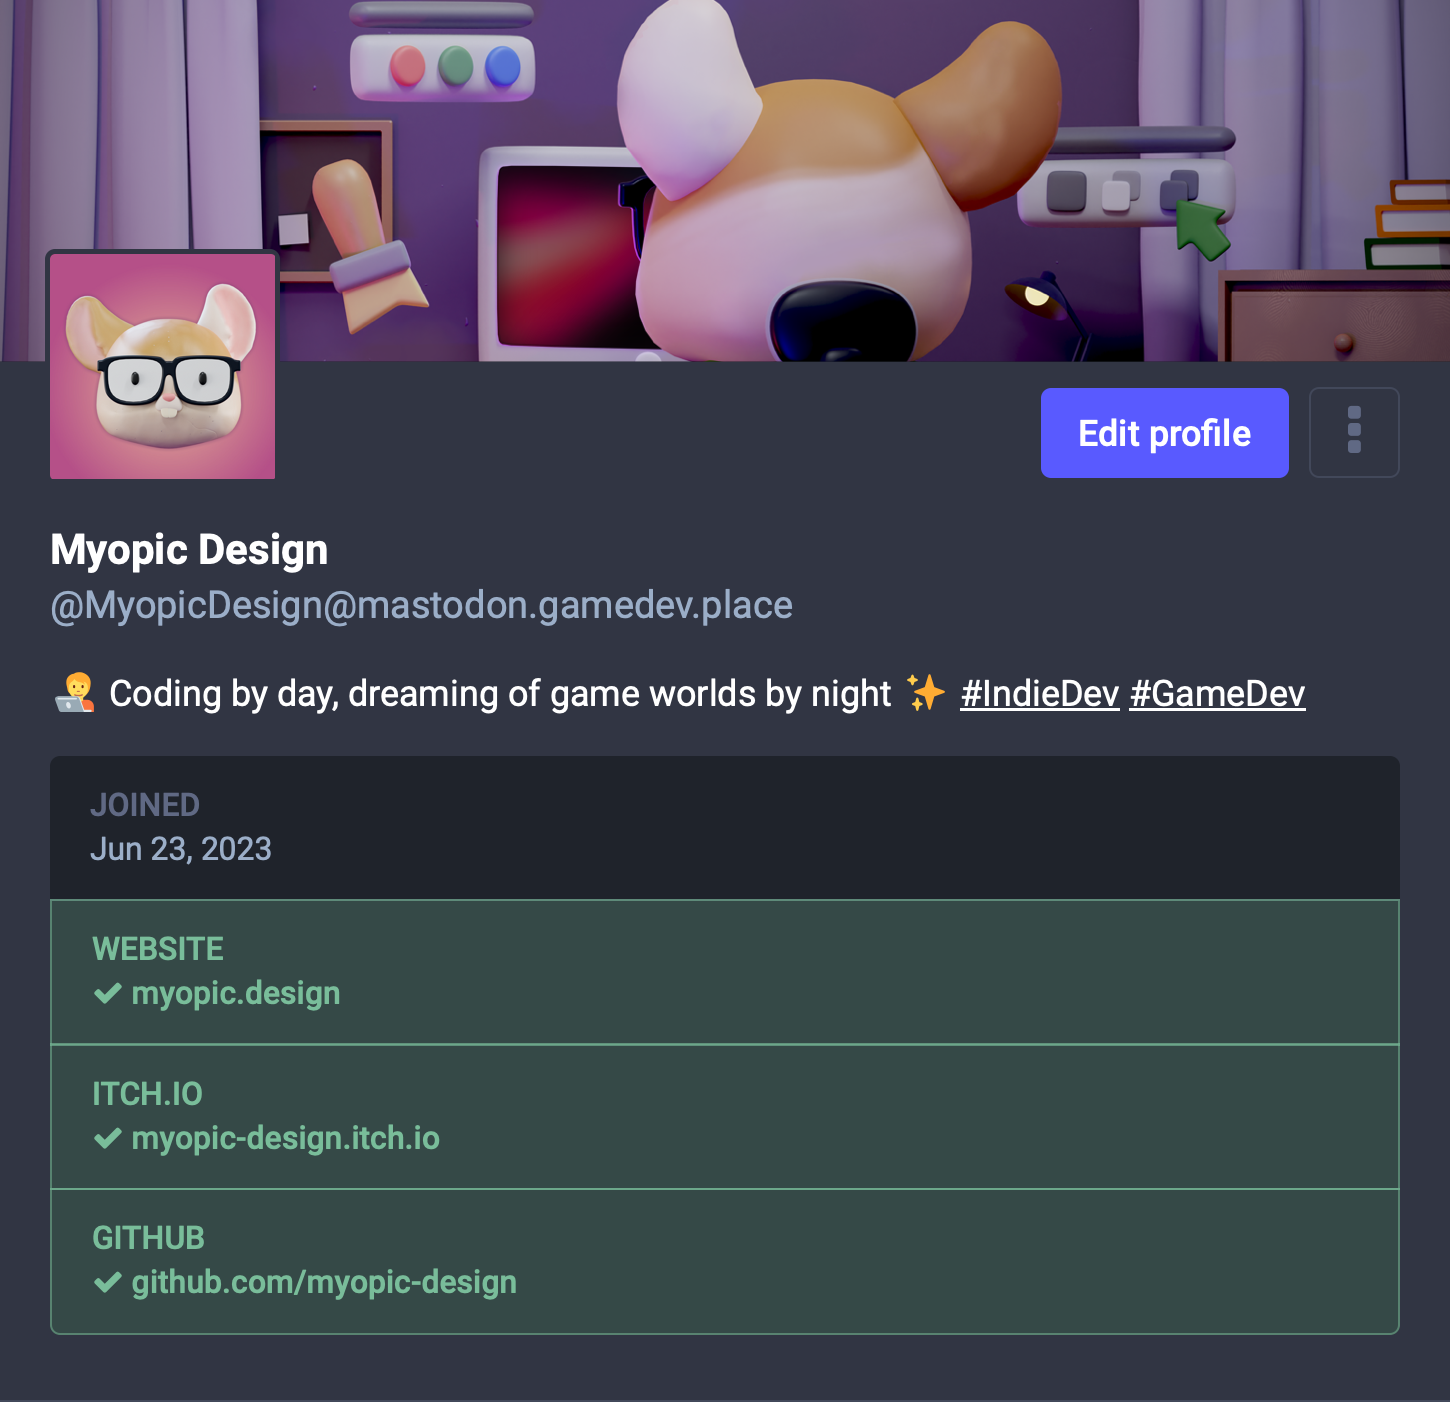 My Mastodon profile showing a verified itch.io link with a green checkmark